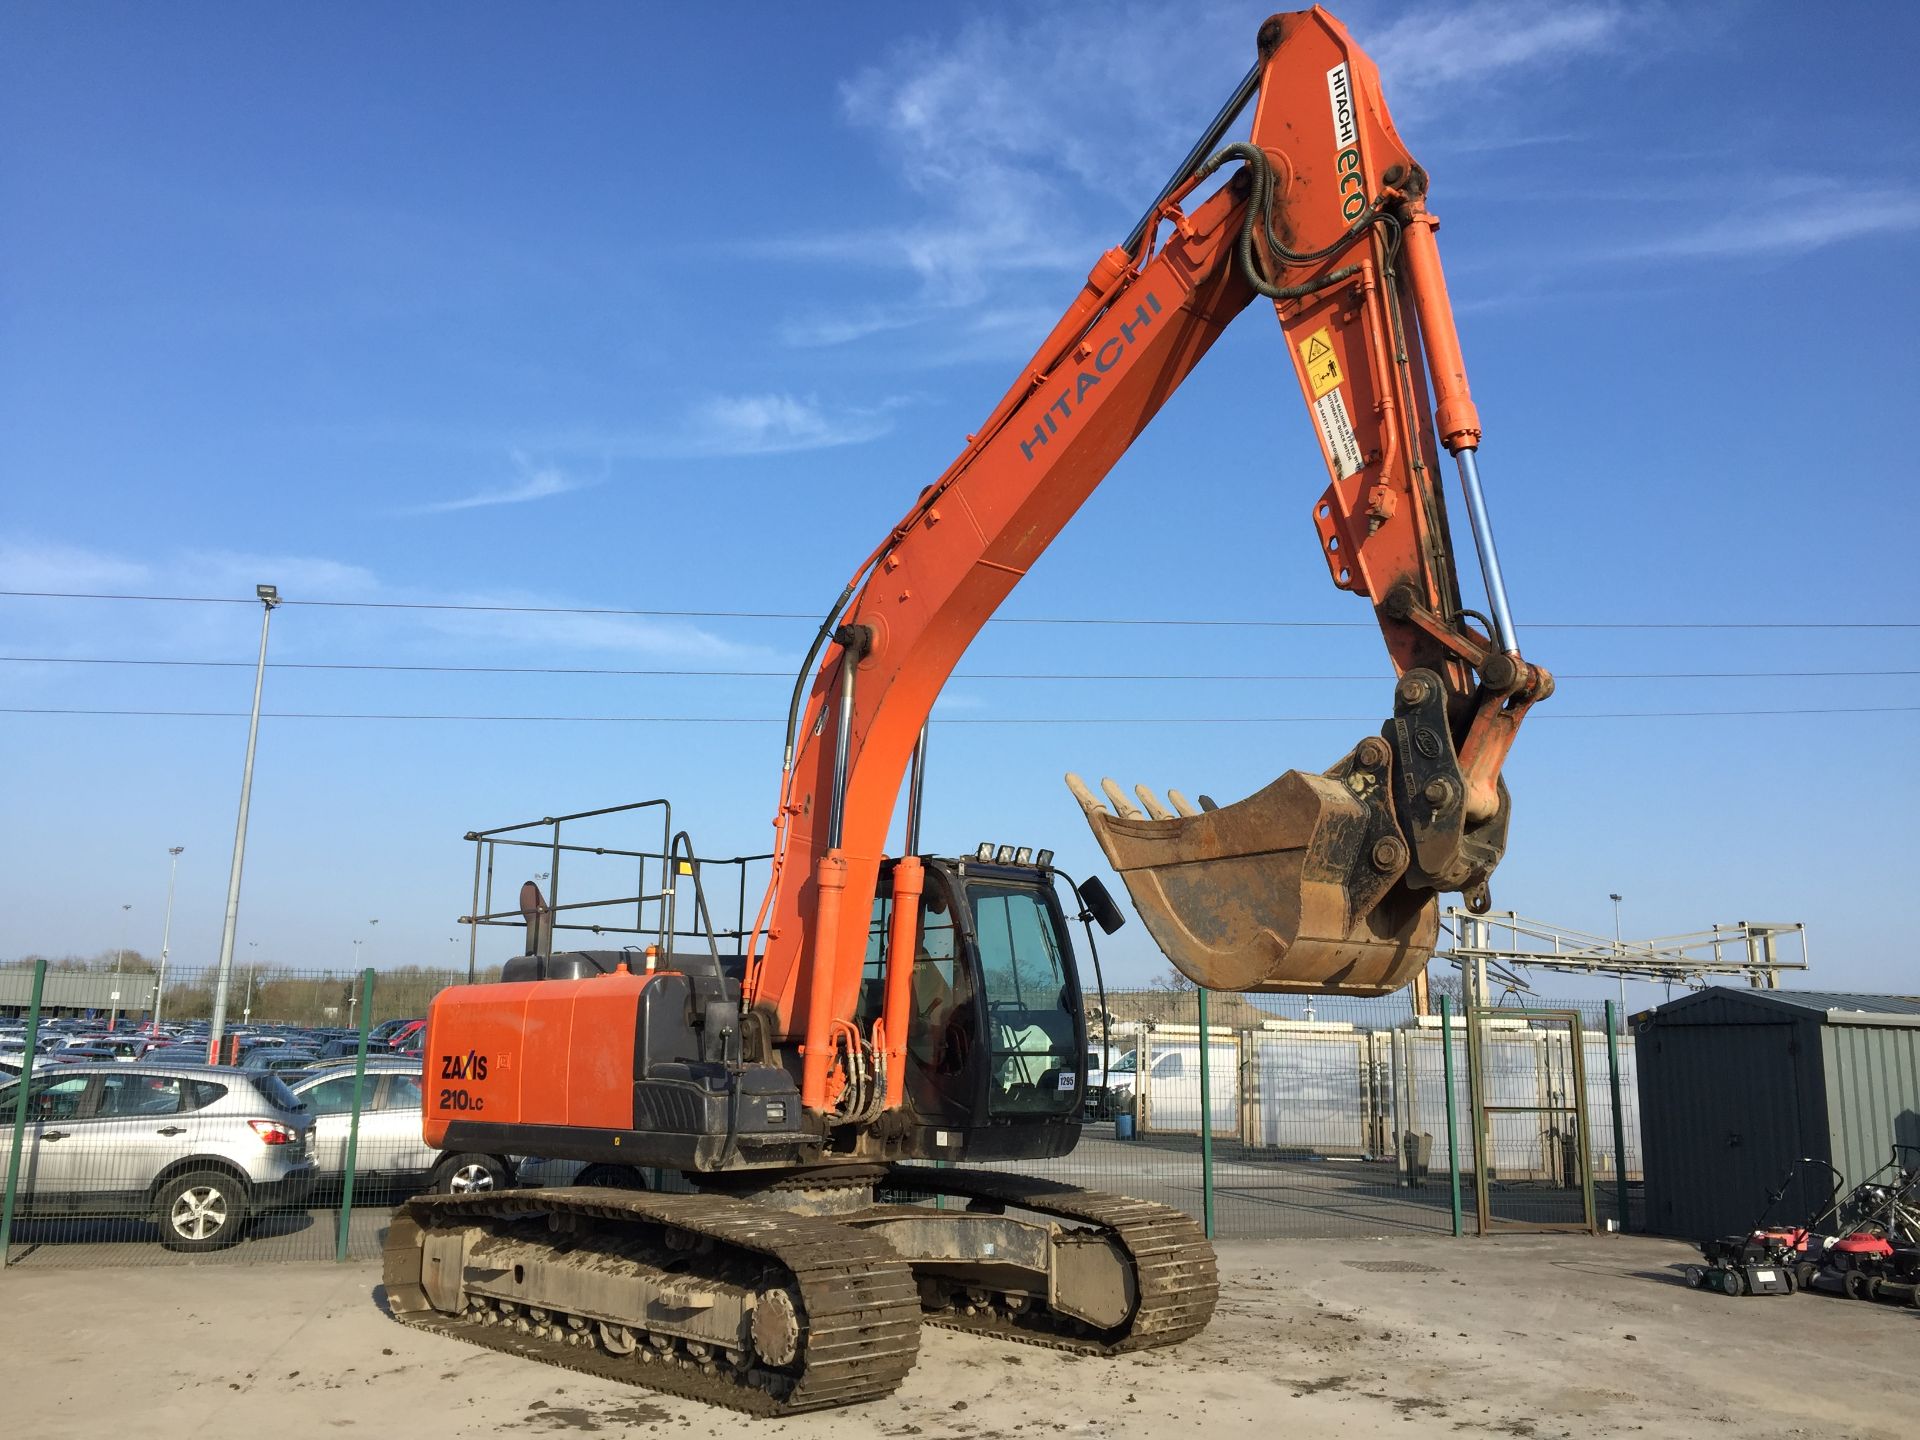 PL-14030 2014 Hitachi Zaxis ZX210LC-58 21T Excavator - Image 8 of 32